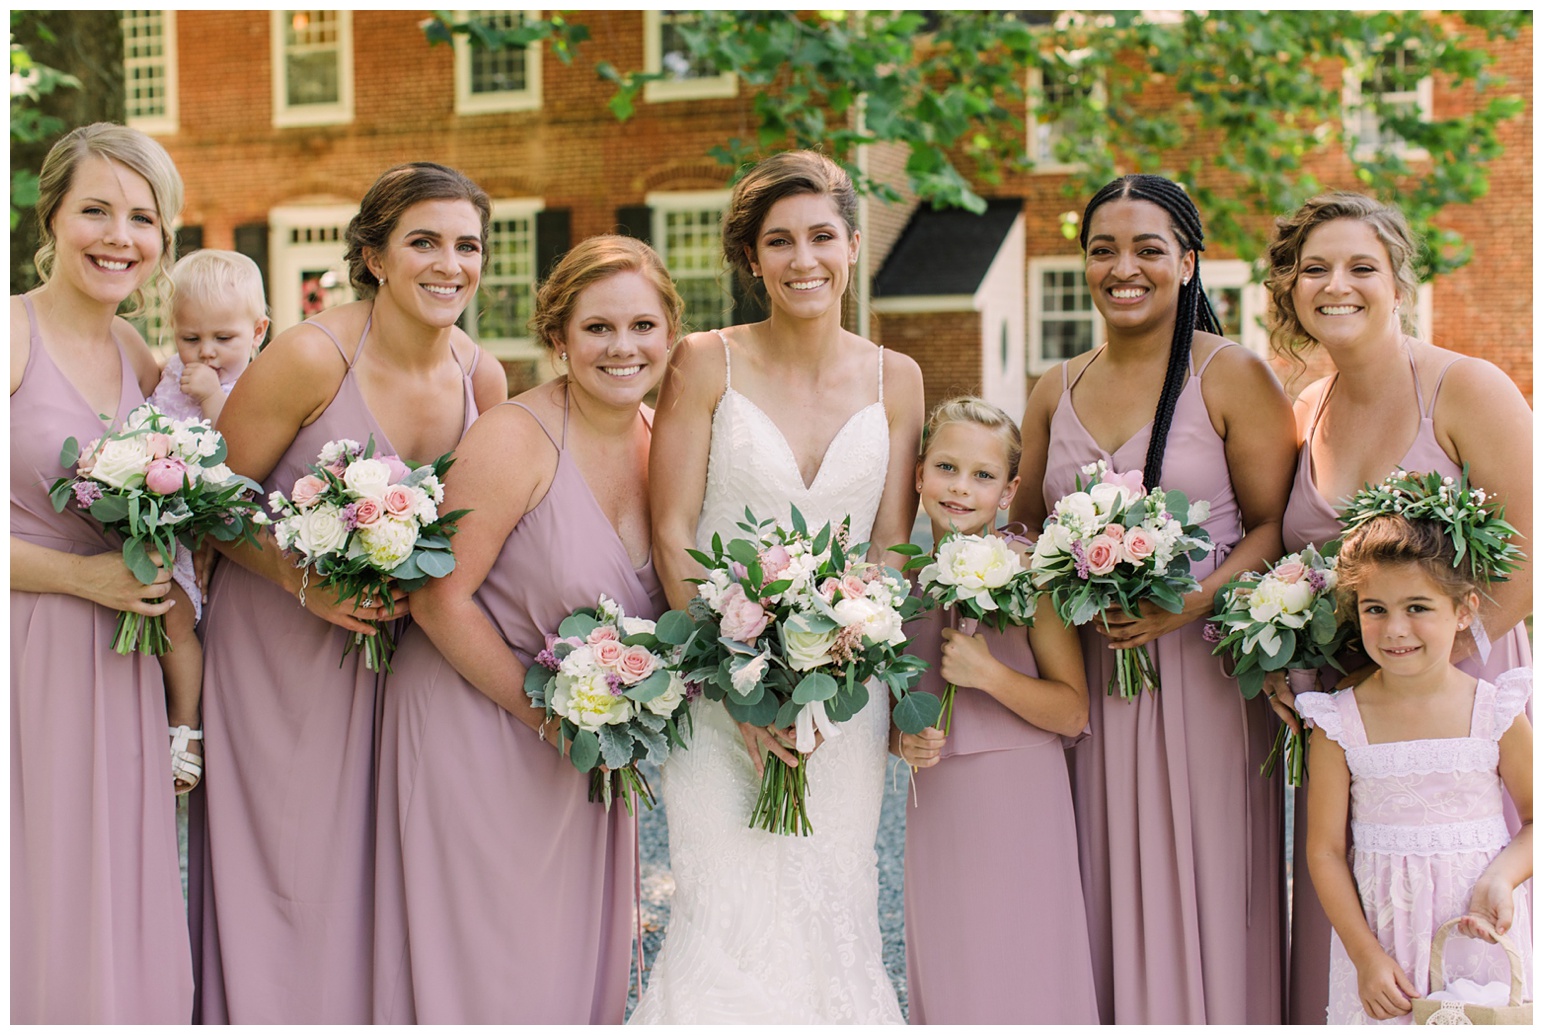 worsell manor wedding in the summer - warwick md - now featured on My Eastern Shore Wedding - coastal - sea - nautical - eastern shore - inspired wedding ideas and inspo - photo of bride bridesmaids and flower girl outdoors in front of brick manor style building - one flower girl wearing flower crown carrying basket